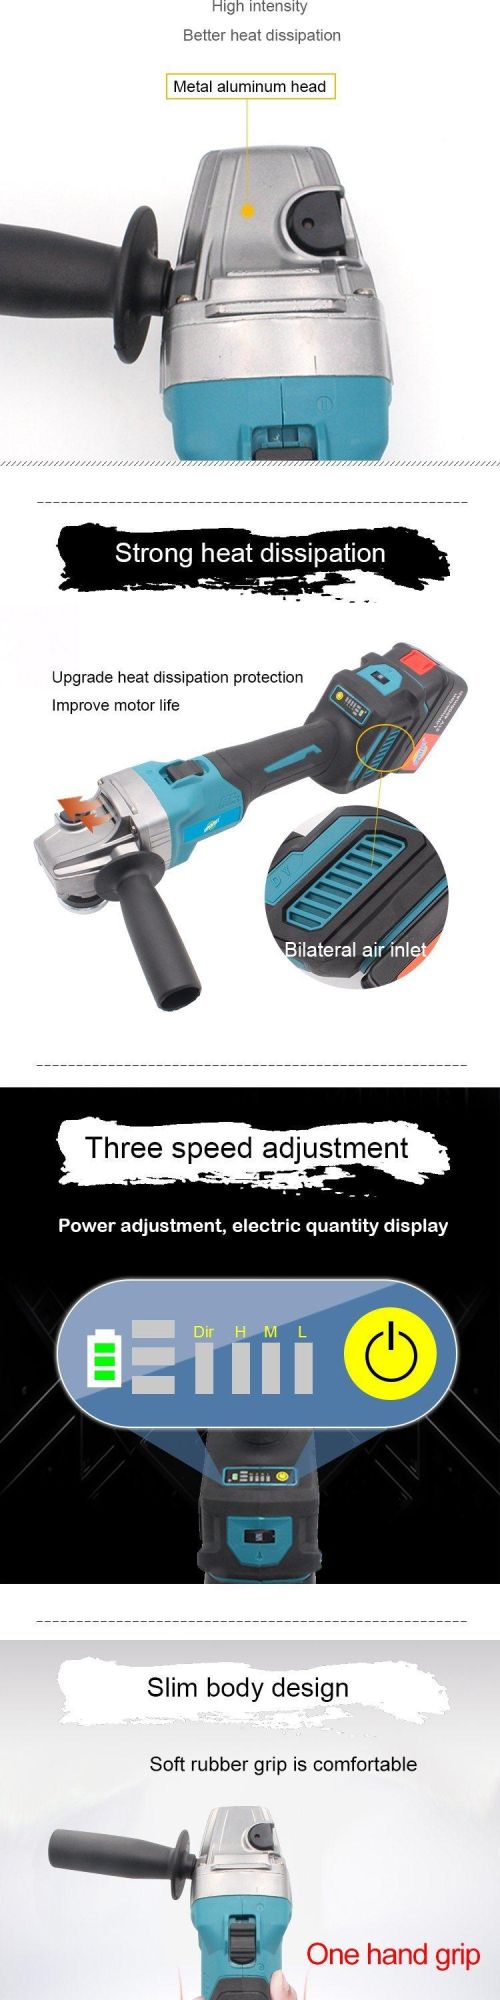 Cordless Angle Grinder Big Double Battery